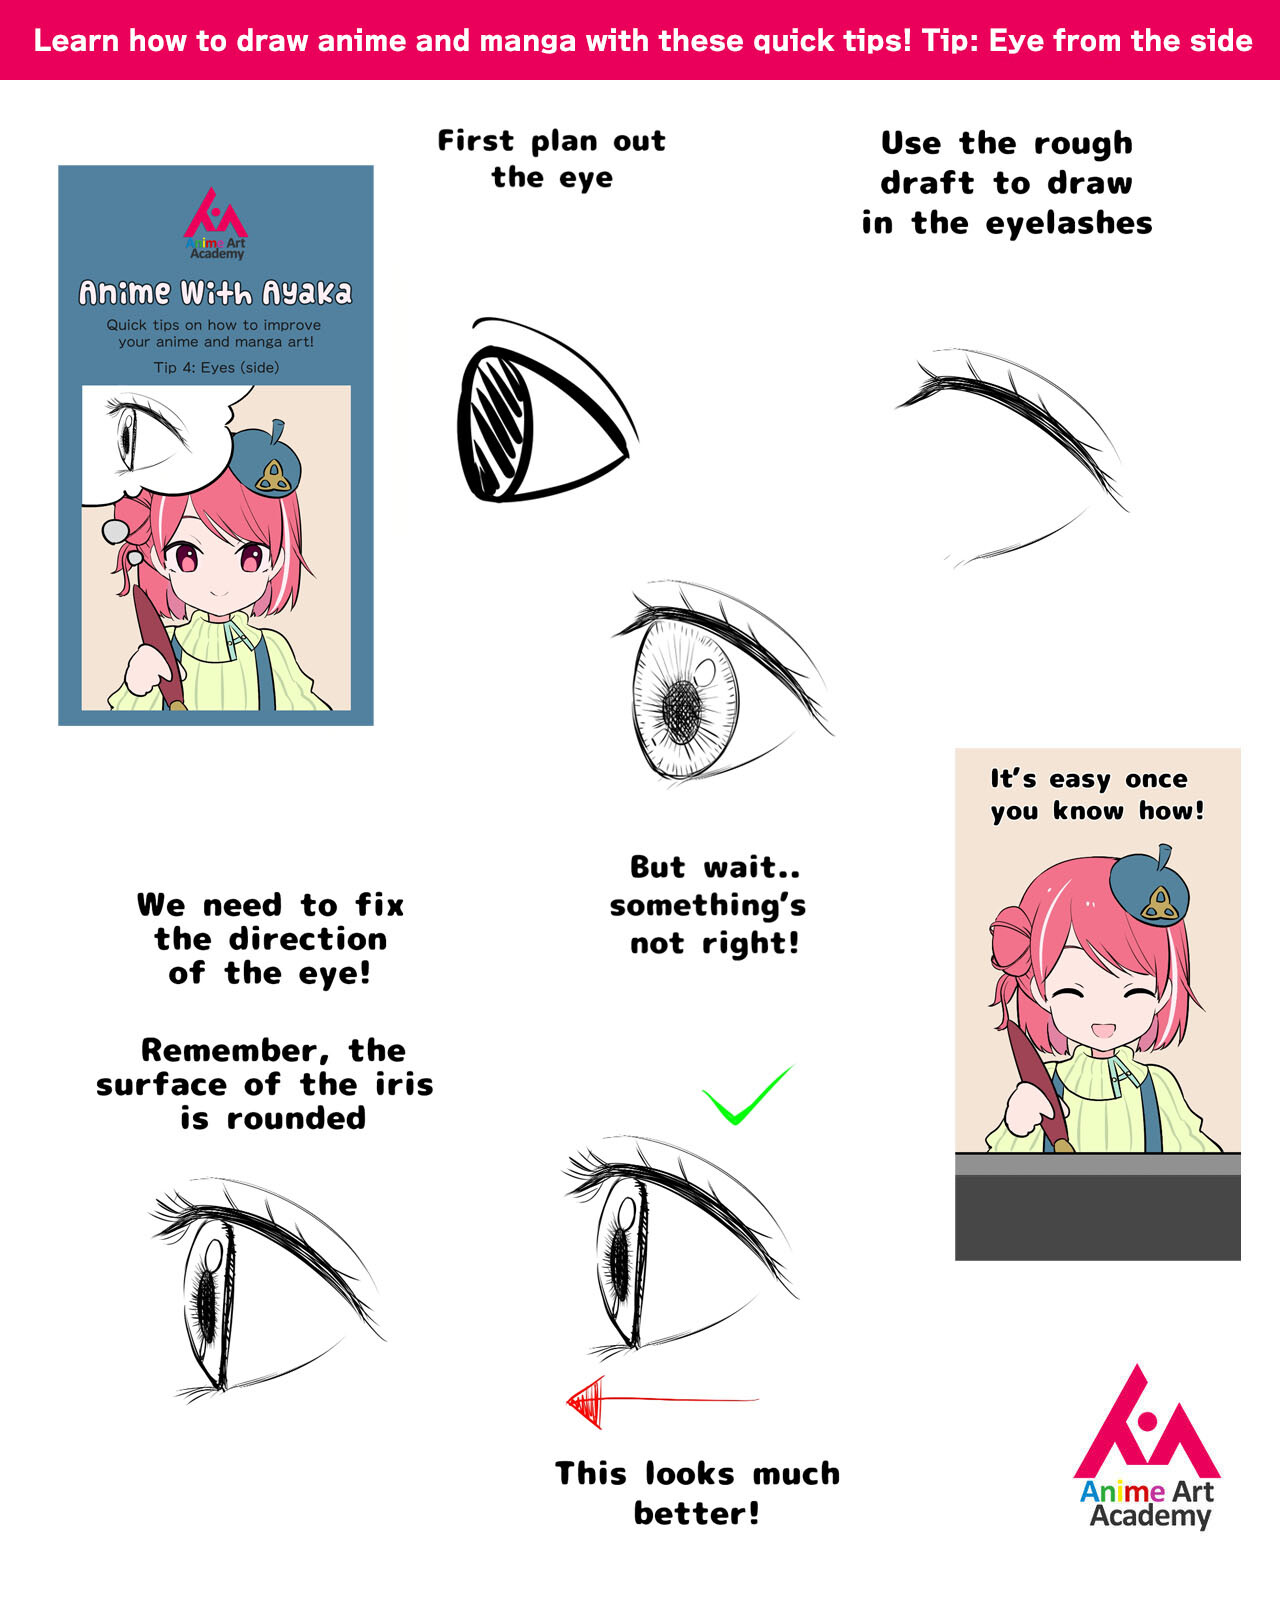 ArtStation  Special tips for drawing anime eyes